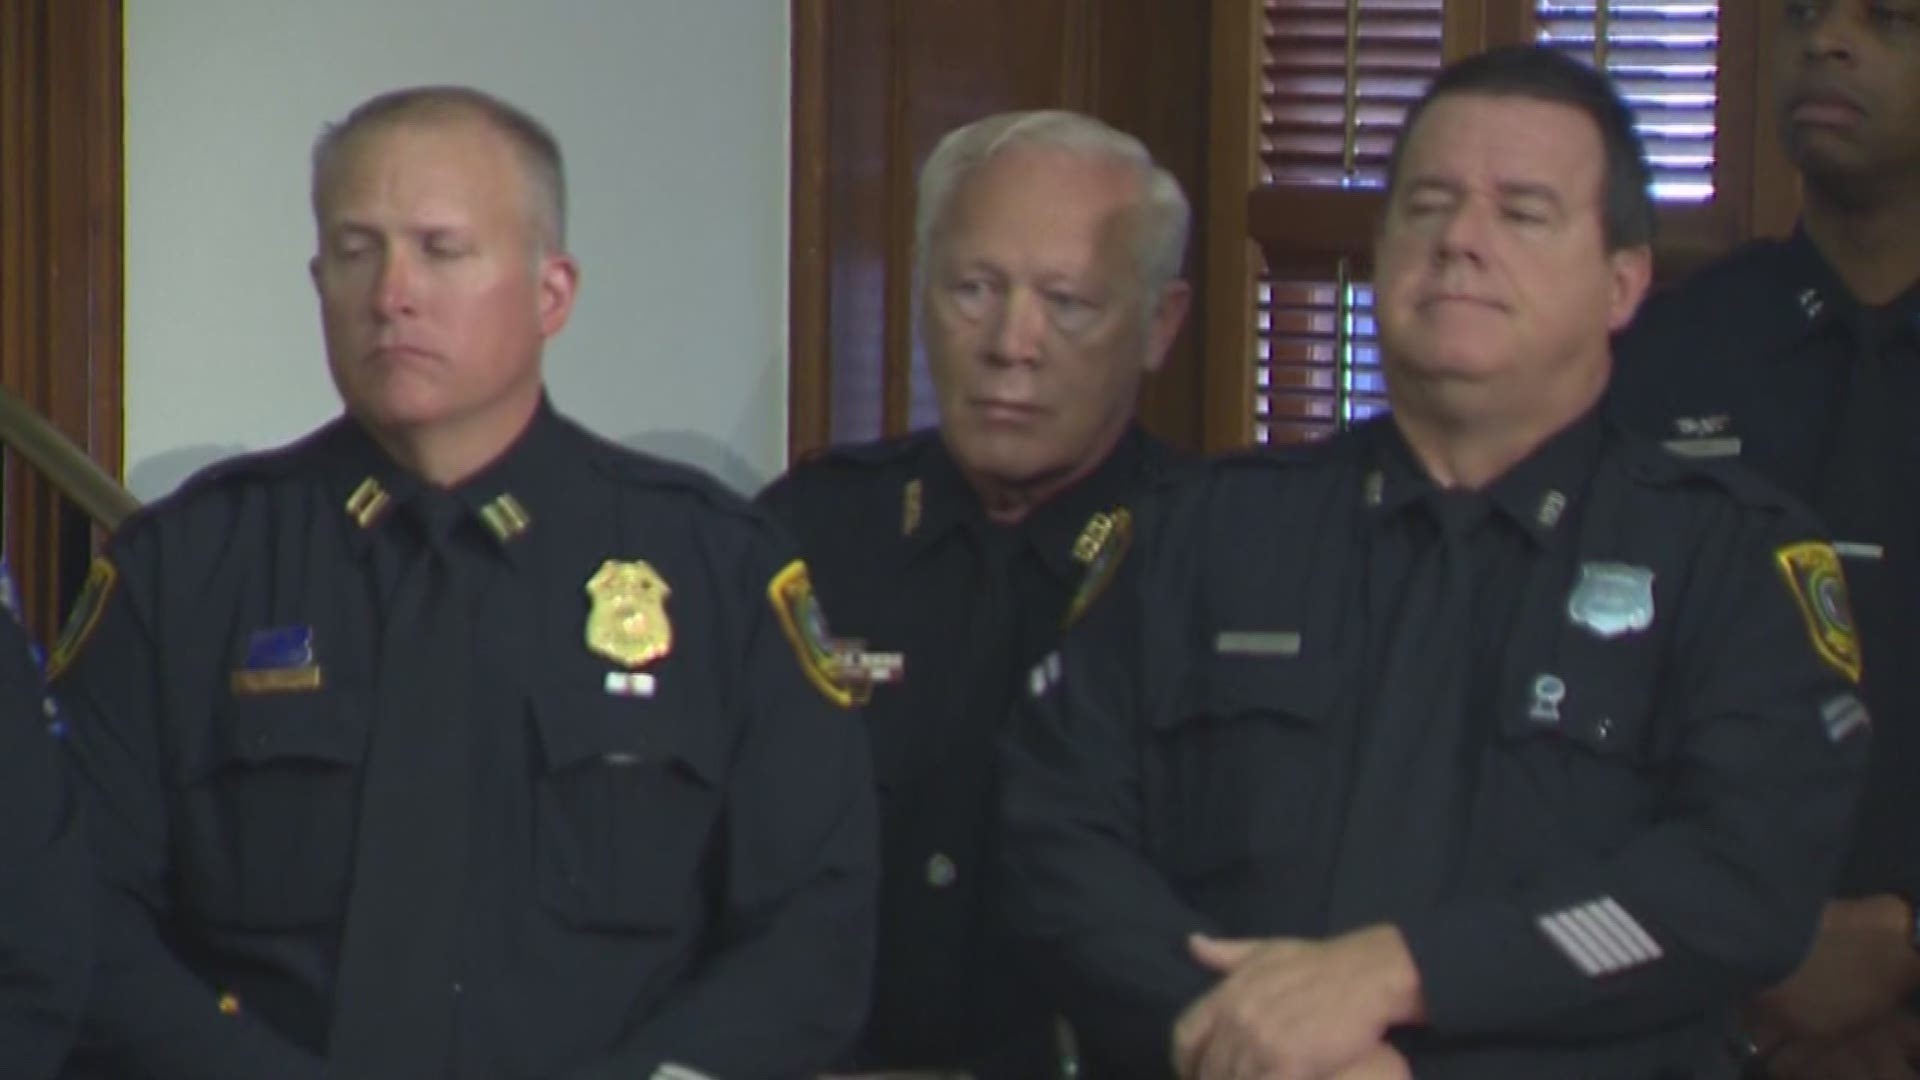 Police chiefs from across the state of Texas are calling on lawmakers to kill a bill they say is a threat to public safety.